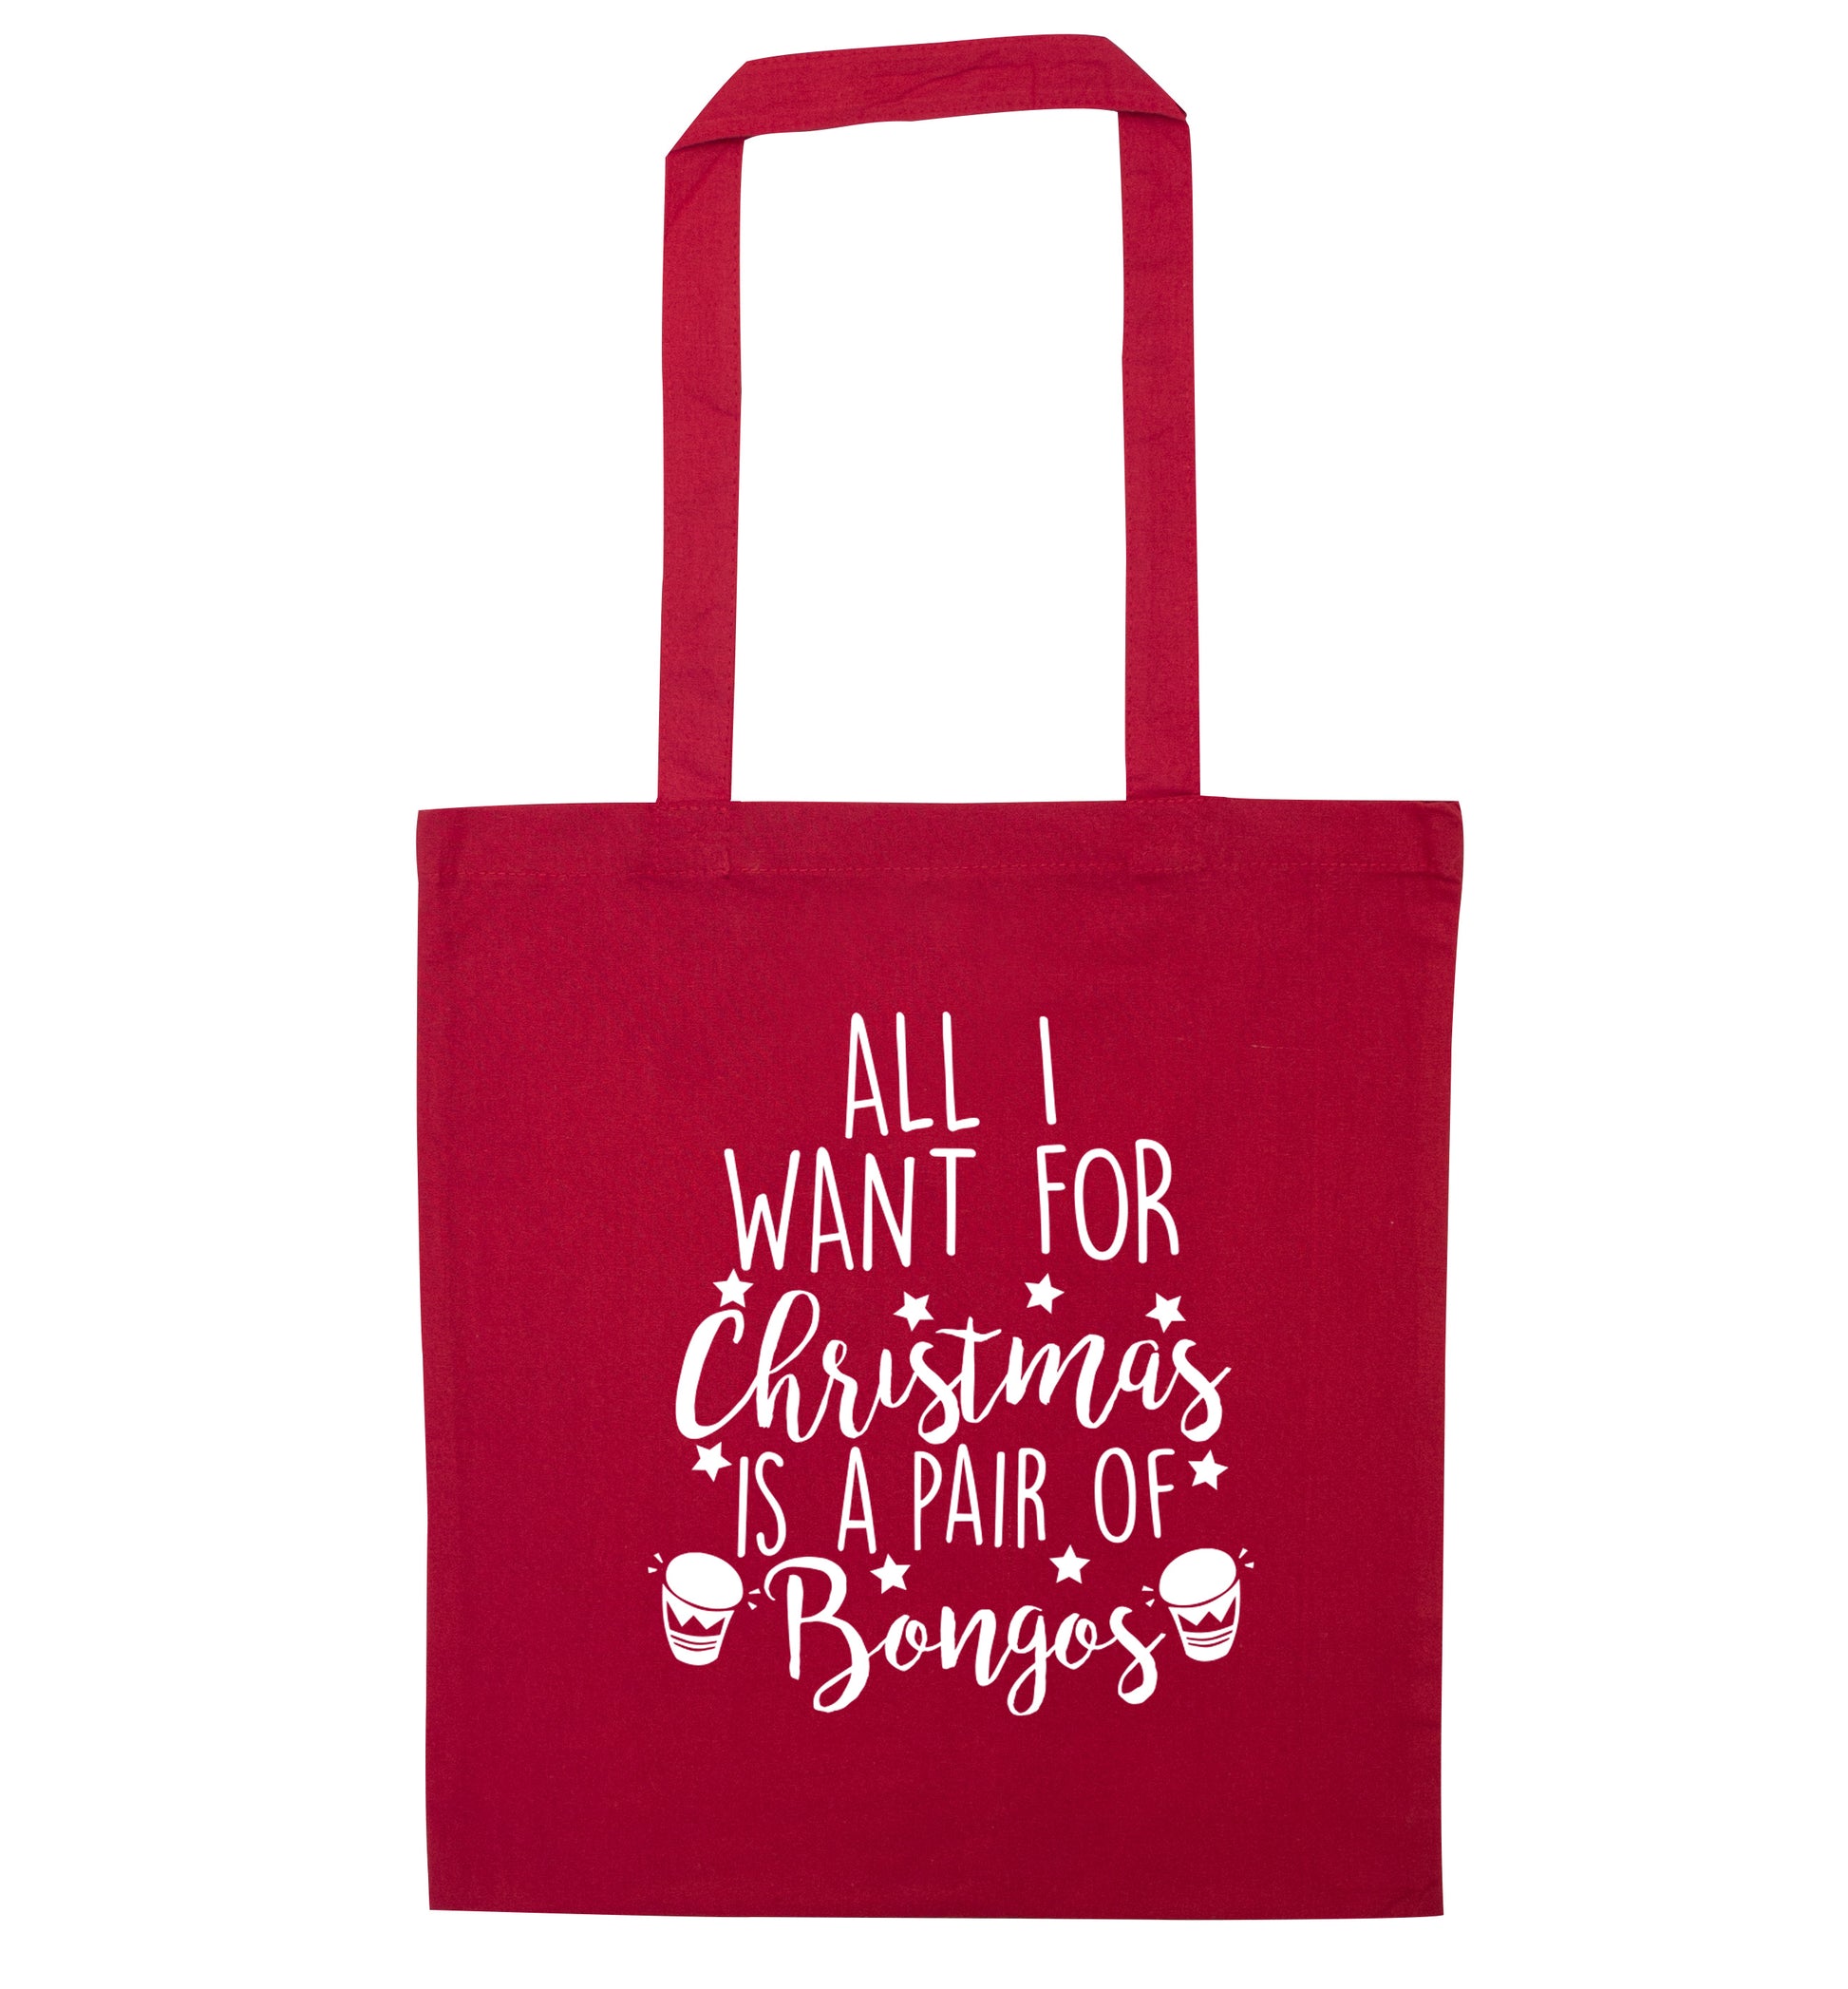 All I want for Christmas is a pair of bongos! red tote bag